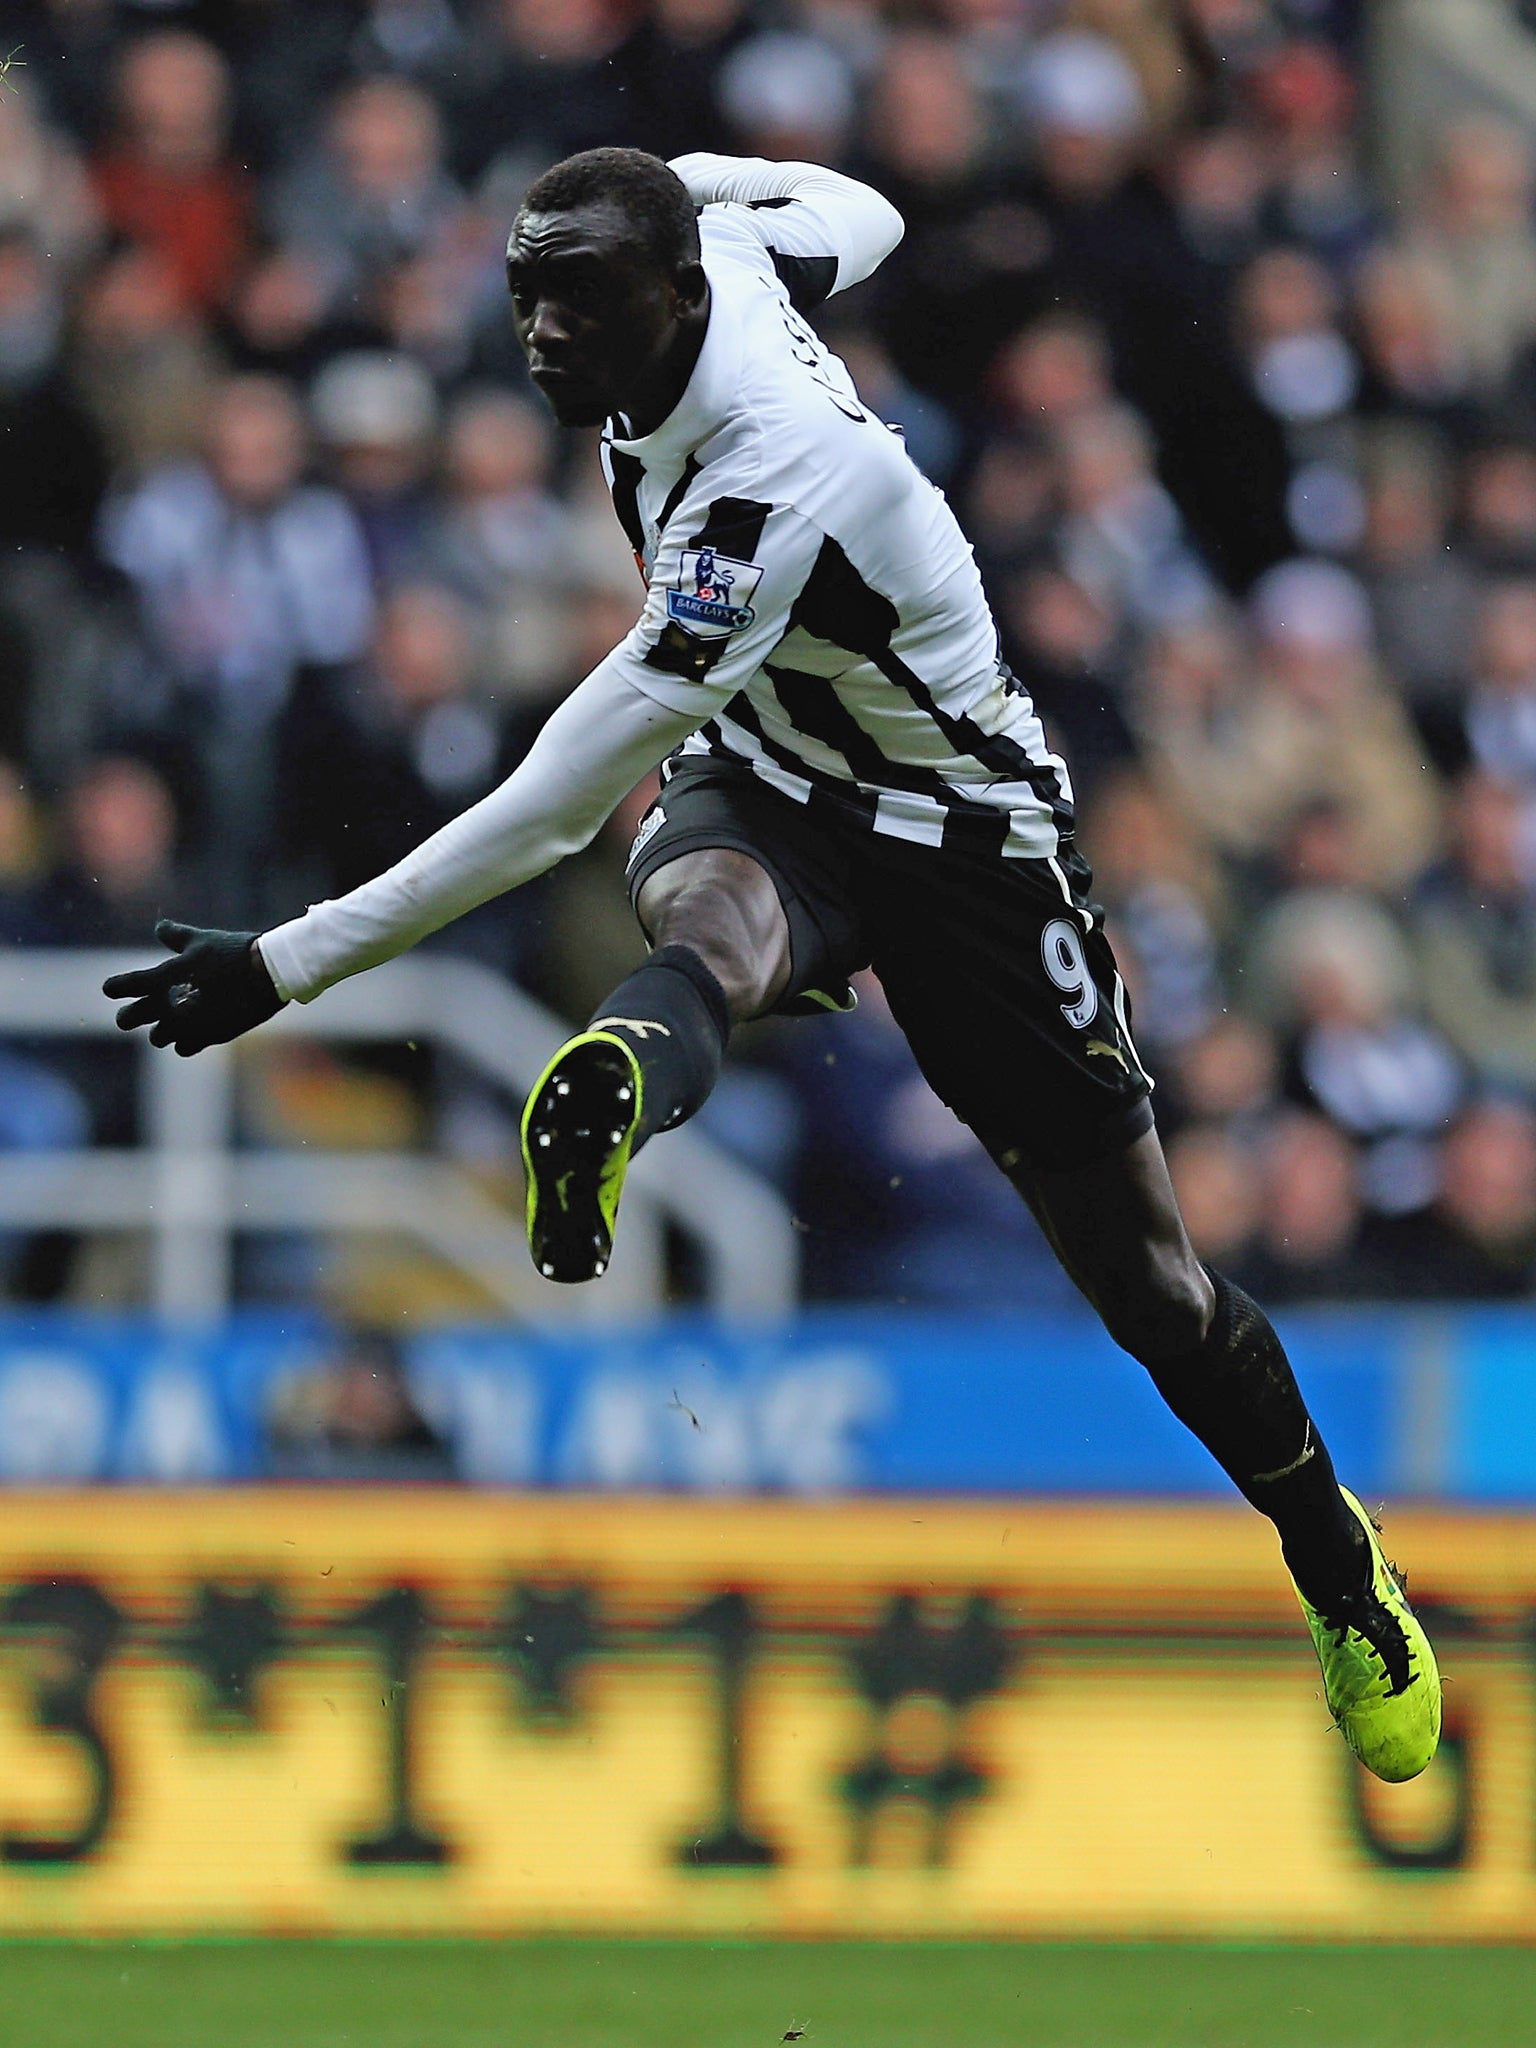 Papiss Cisse smashed home a stunning goal in his side's 4-2 home victory over Southampton